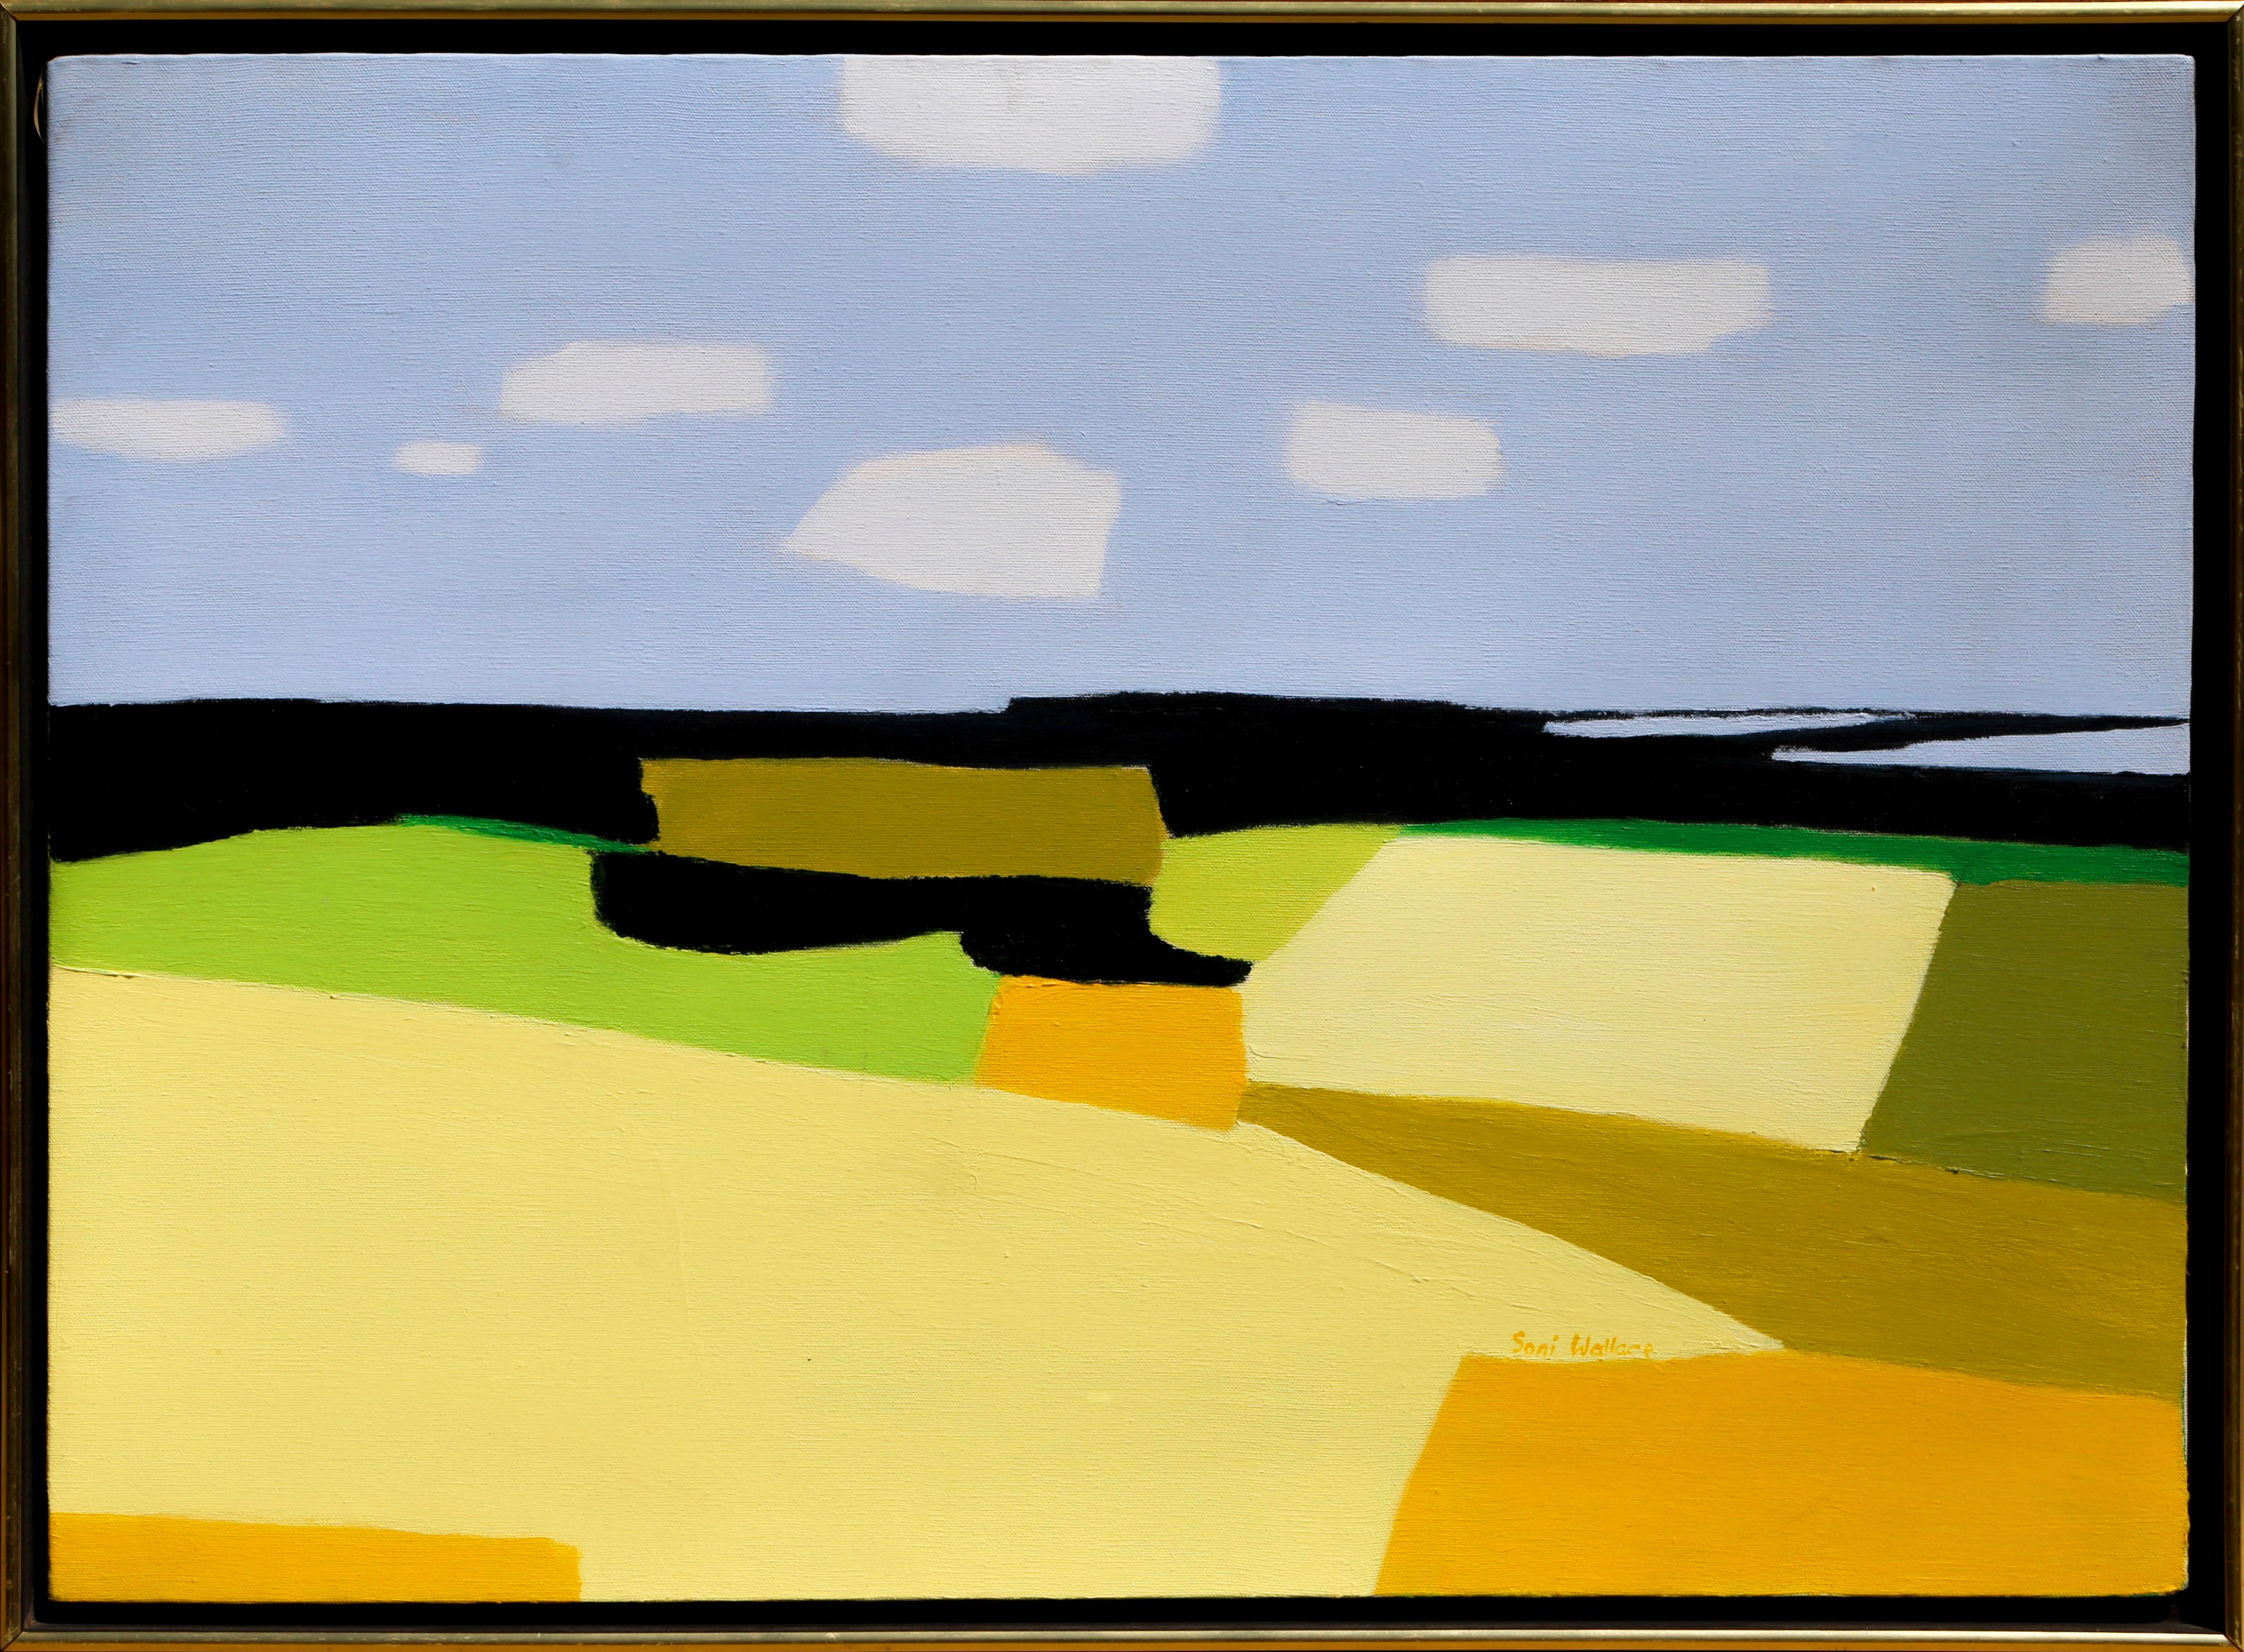 Soni Wallace masters color and form in this Abstract Expressionist painting. Many works from this period in her life reflect coastal landscapes through a lens of minimalism and geometric form. The title of this piece references an area of Scotland